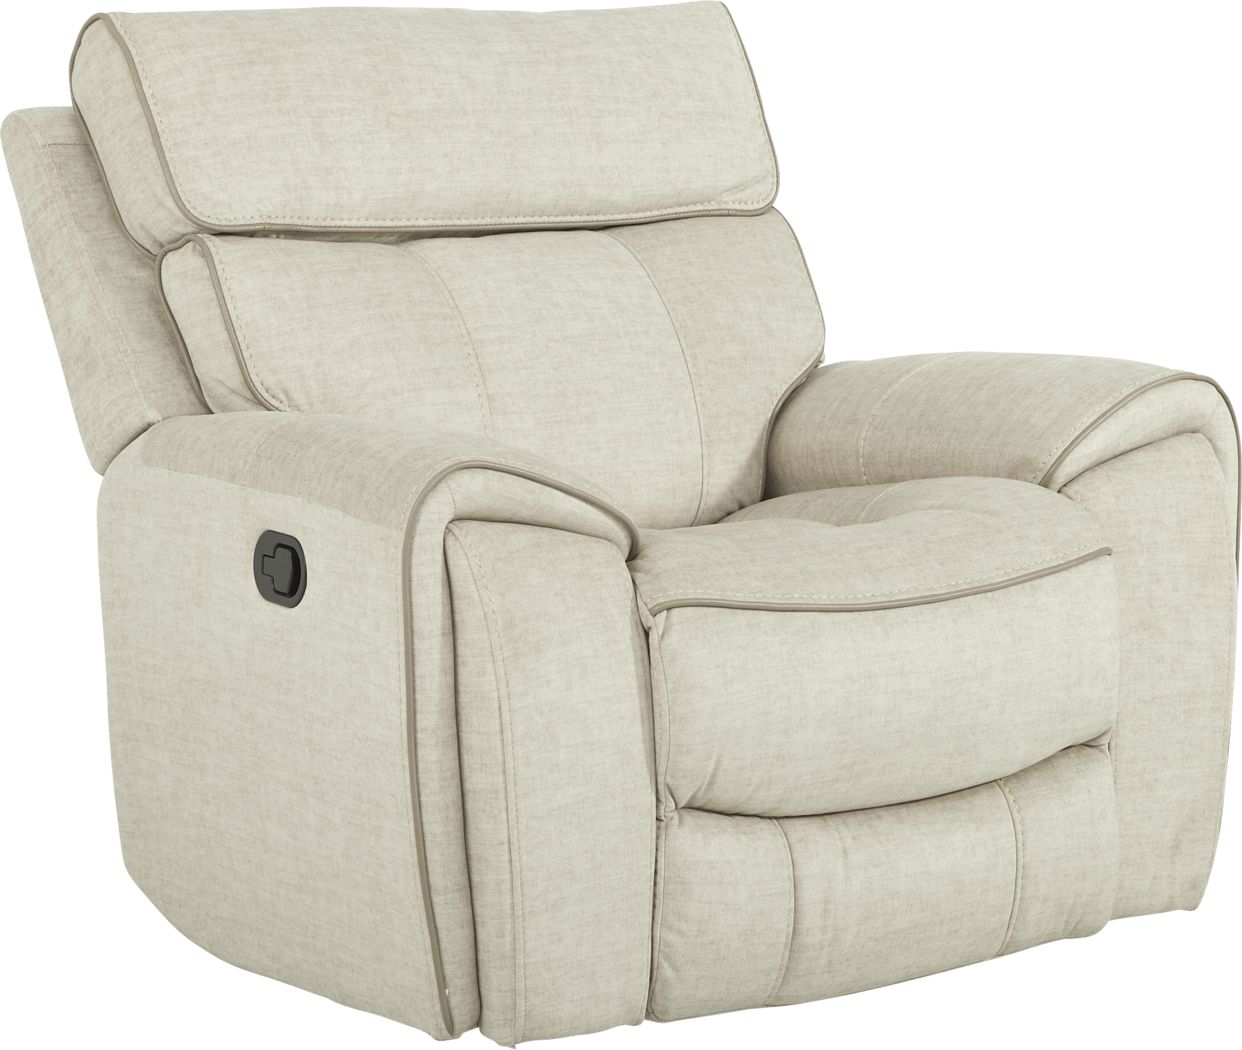 Hosford Beige Glider Recliner - Rooms To Go